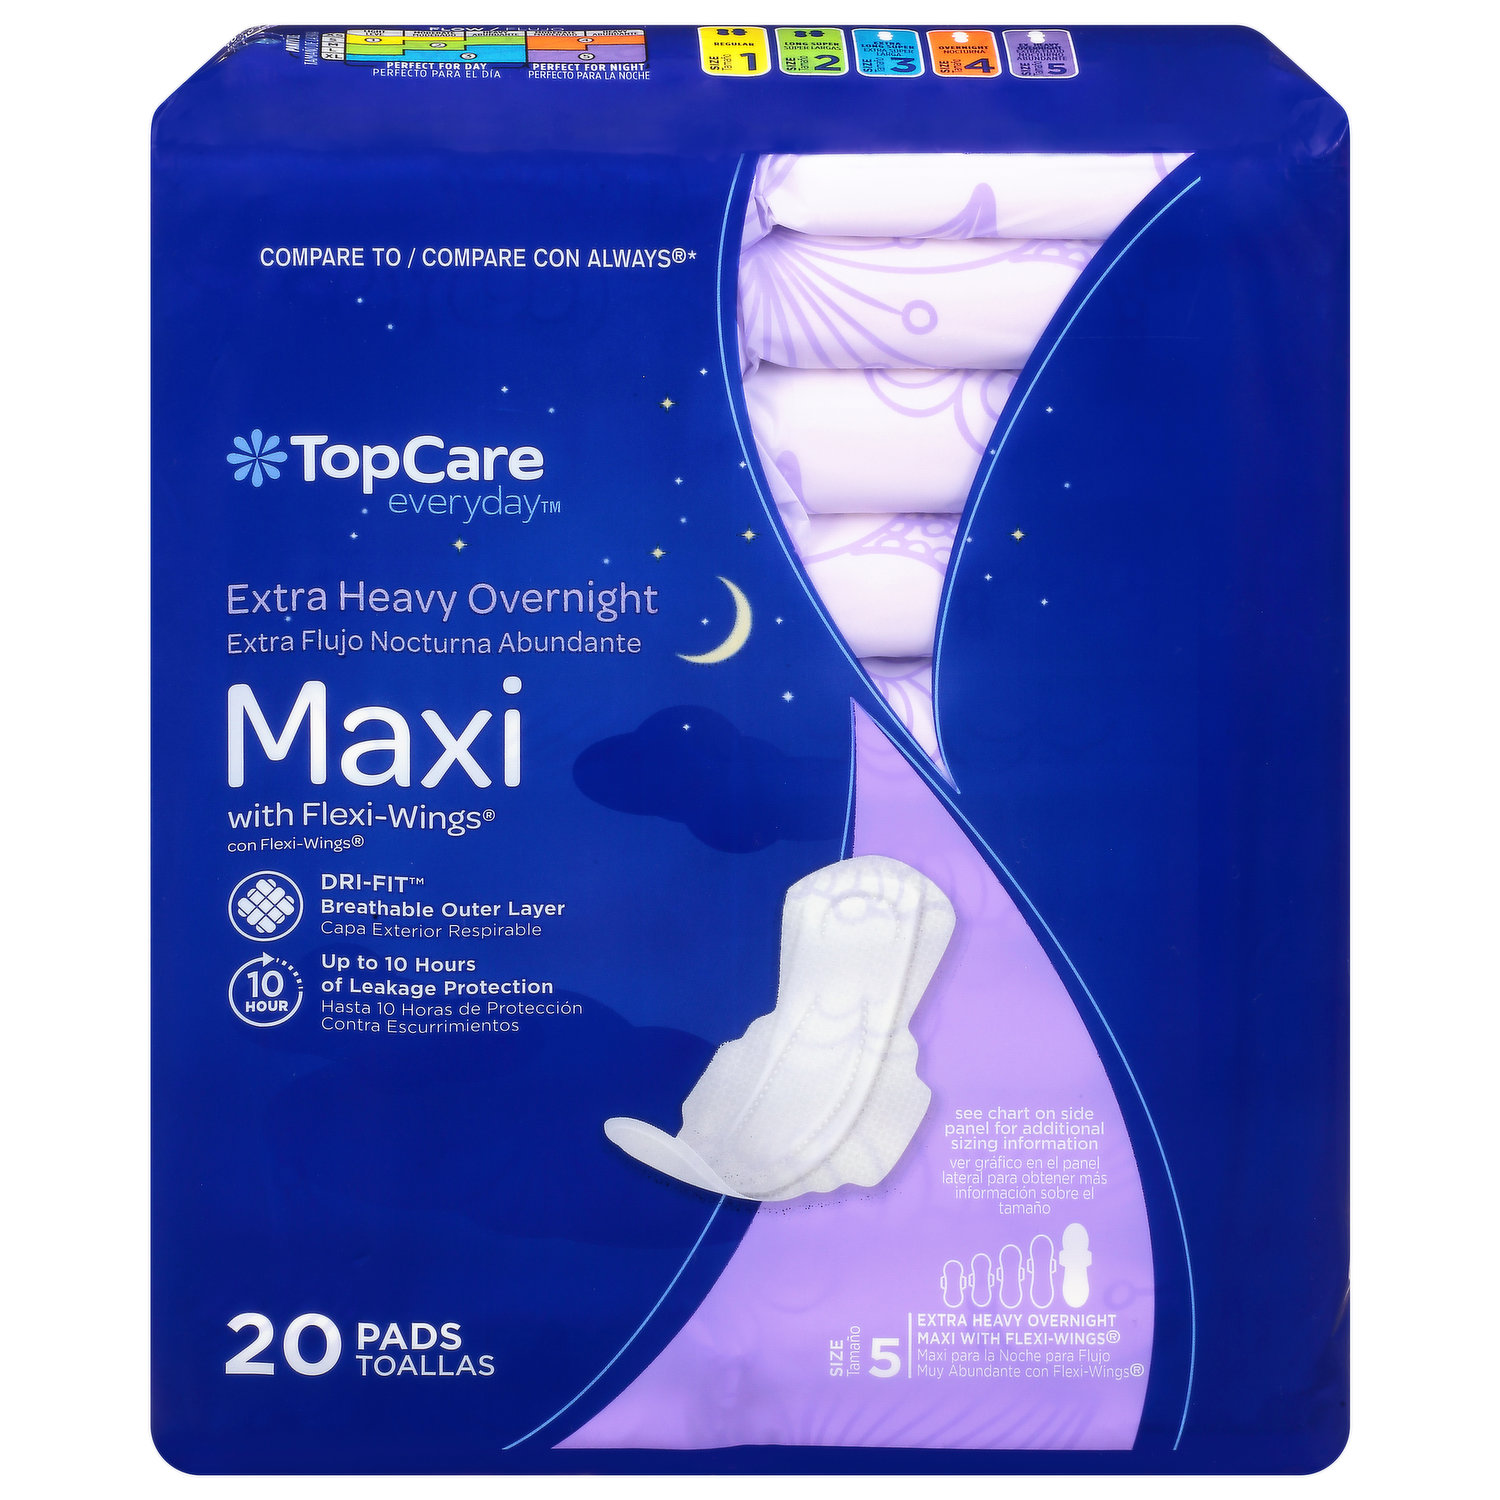 TopCare Pads, Maxi, with Flexi-Wings, Extra Heavy Overnight, Size